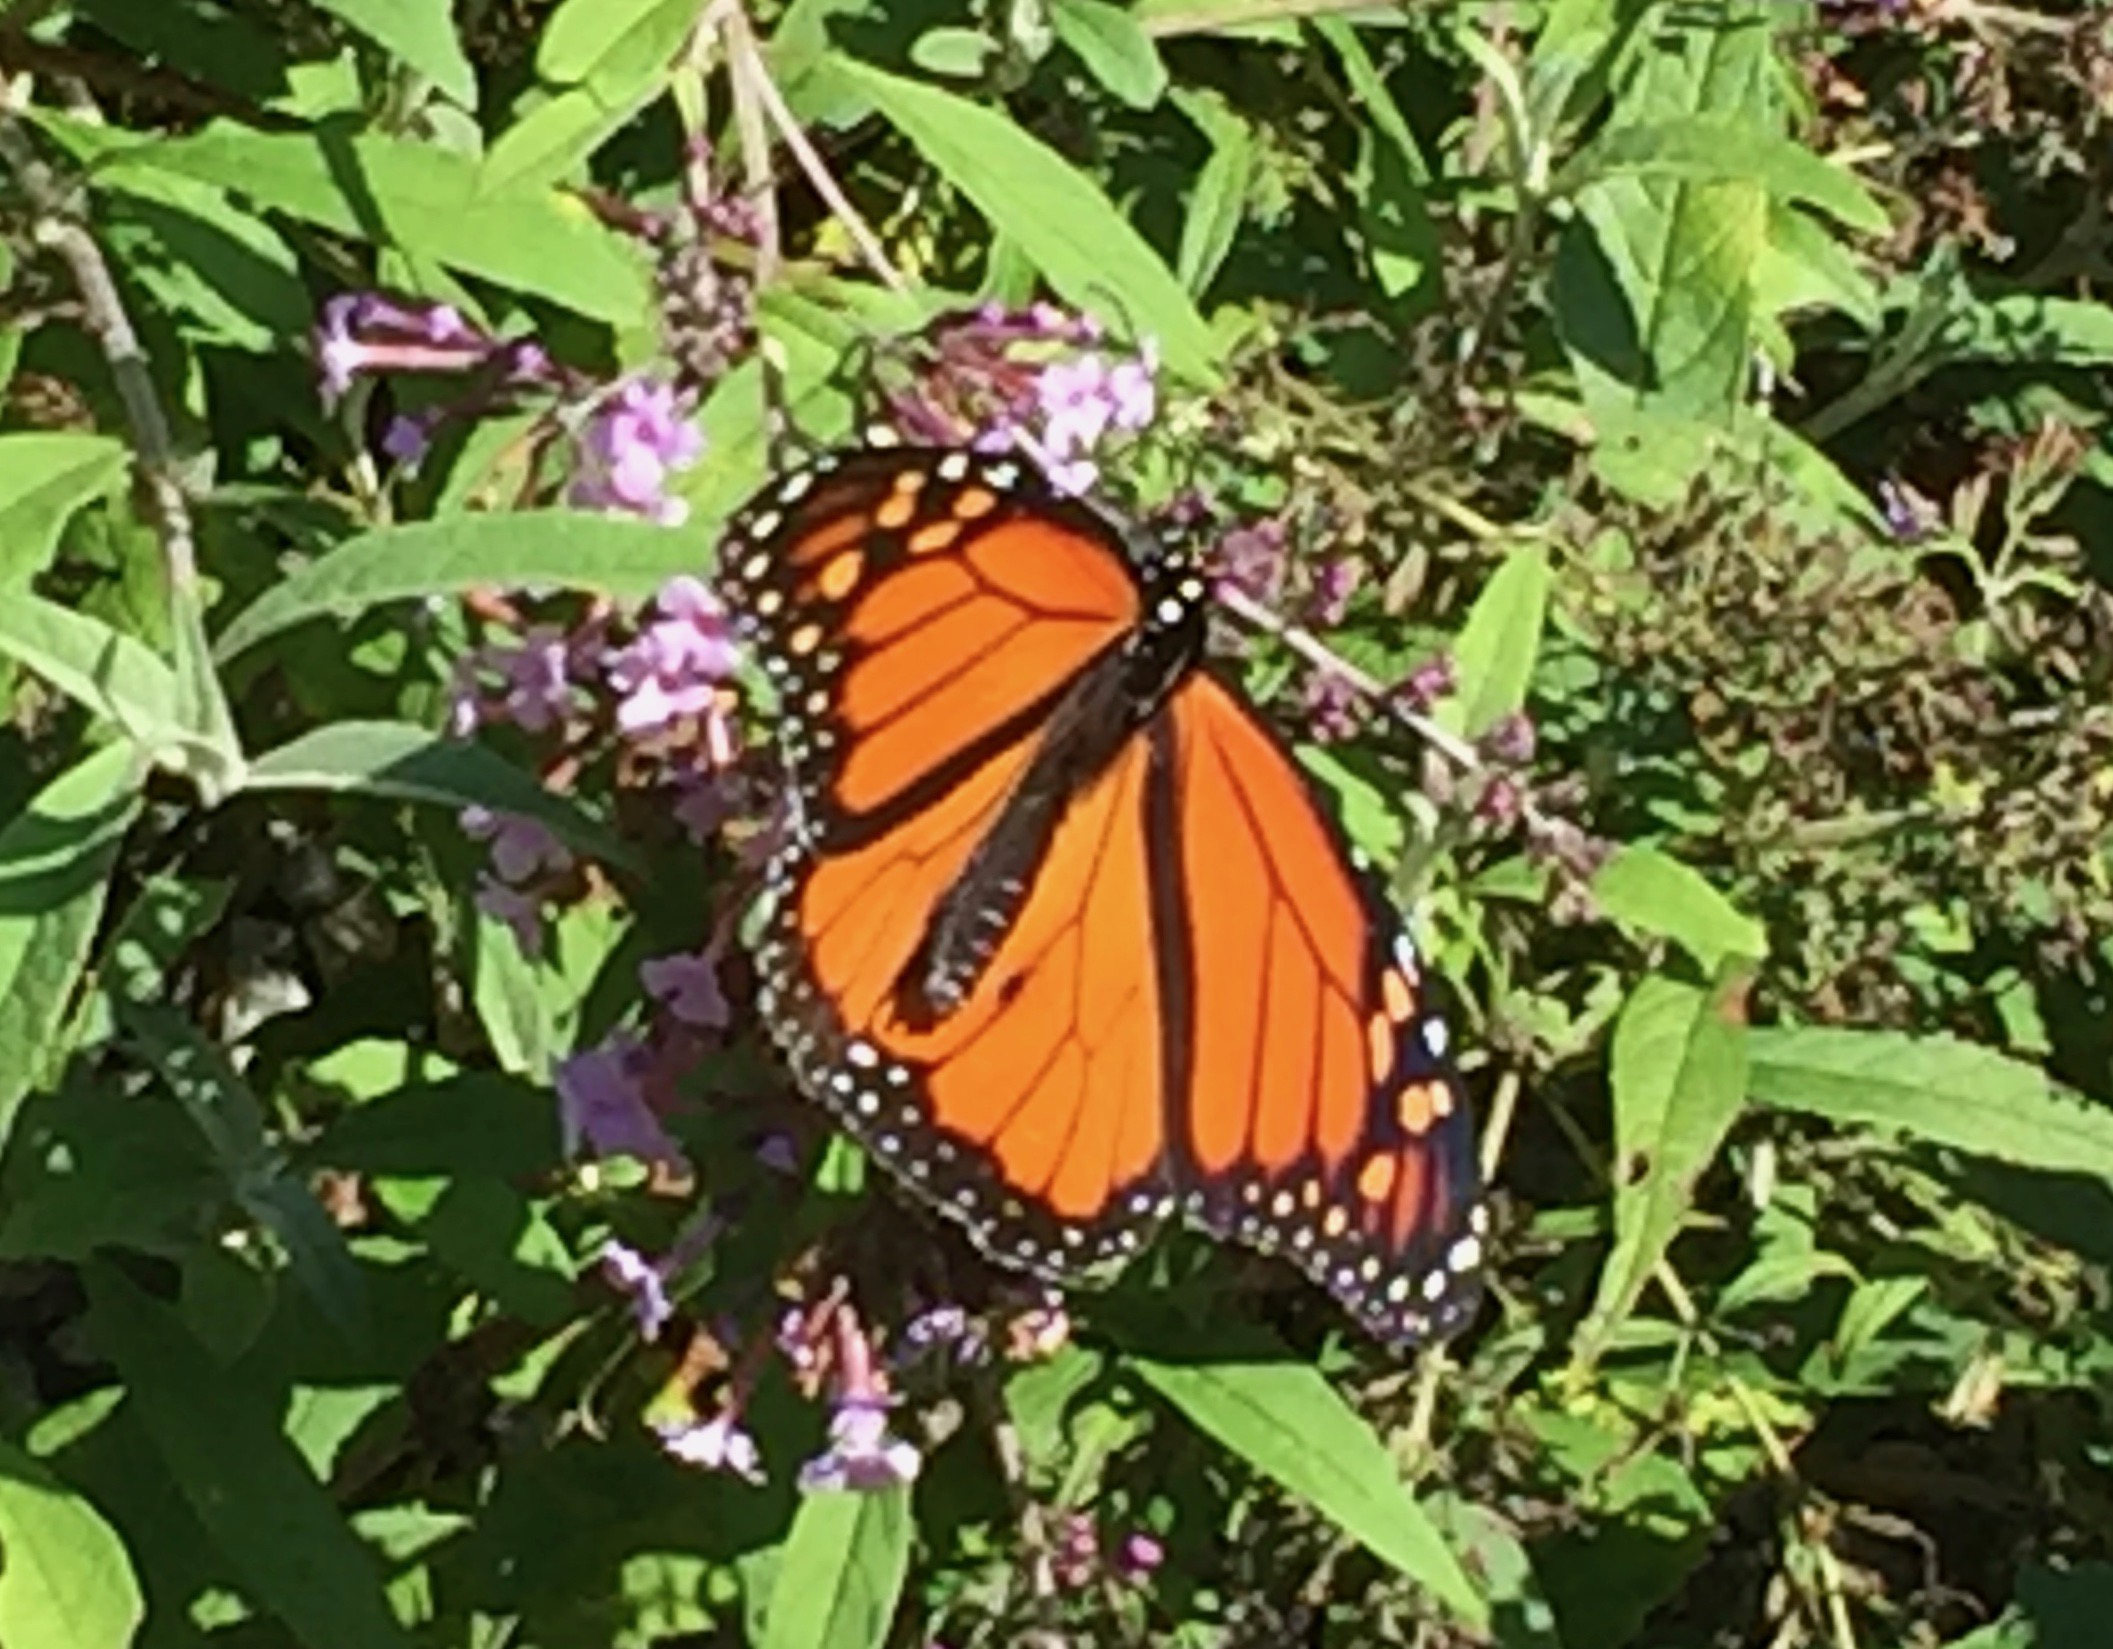 It's the weekend! Number 127, Monarch Butterfly